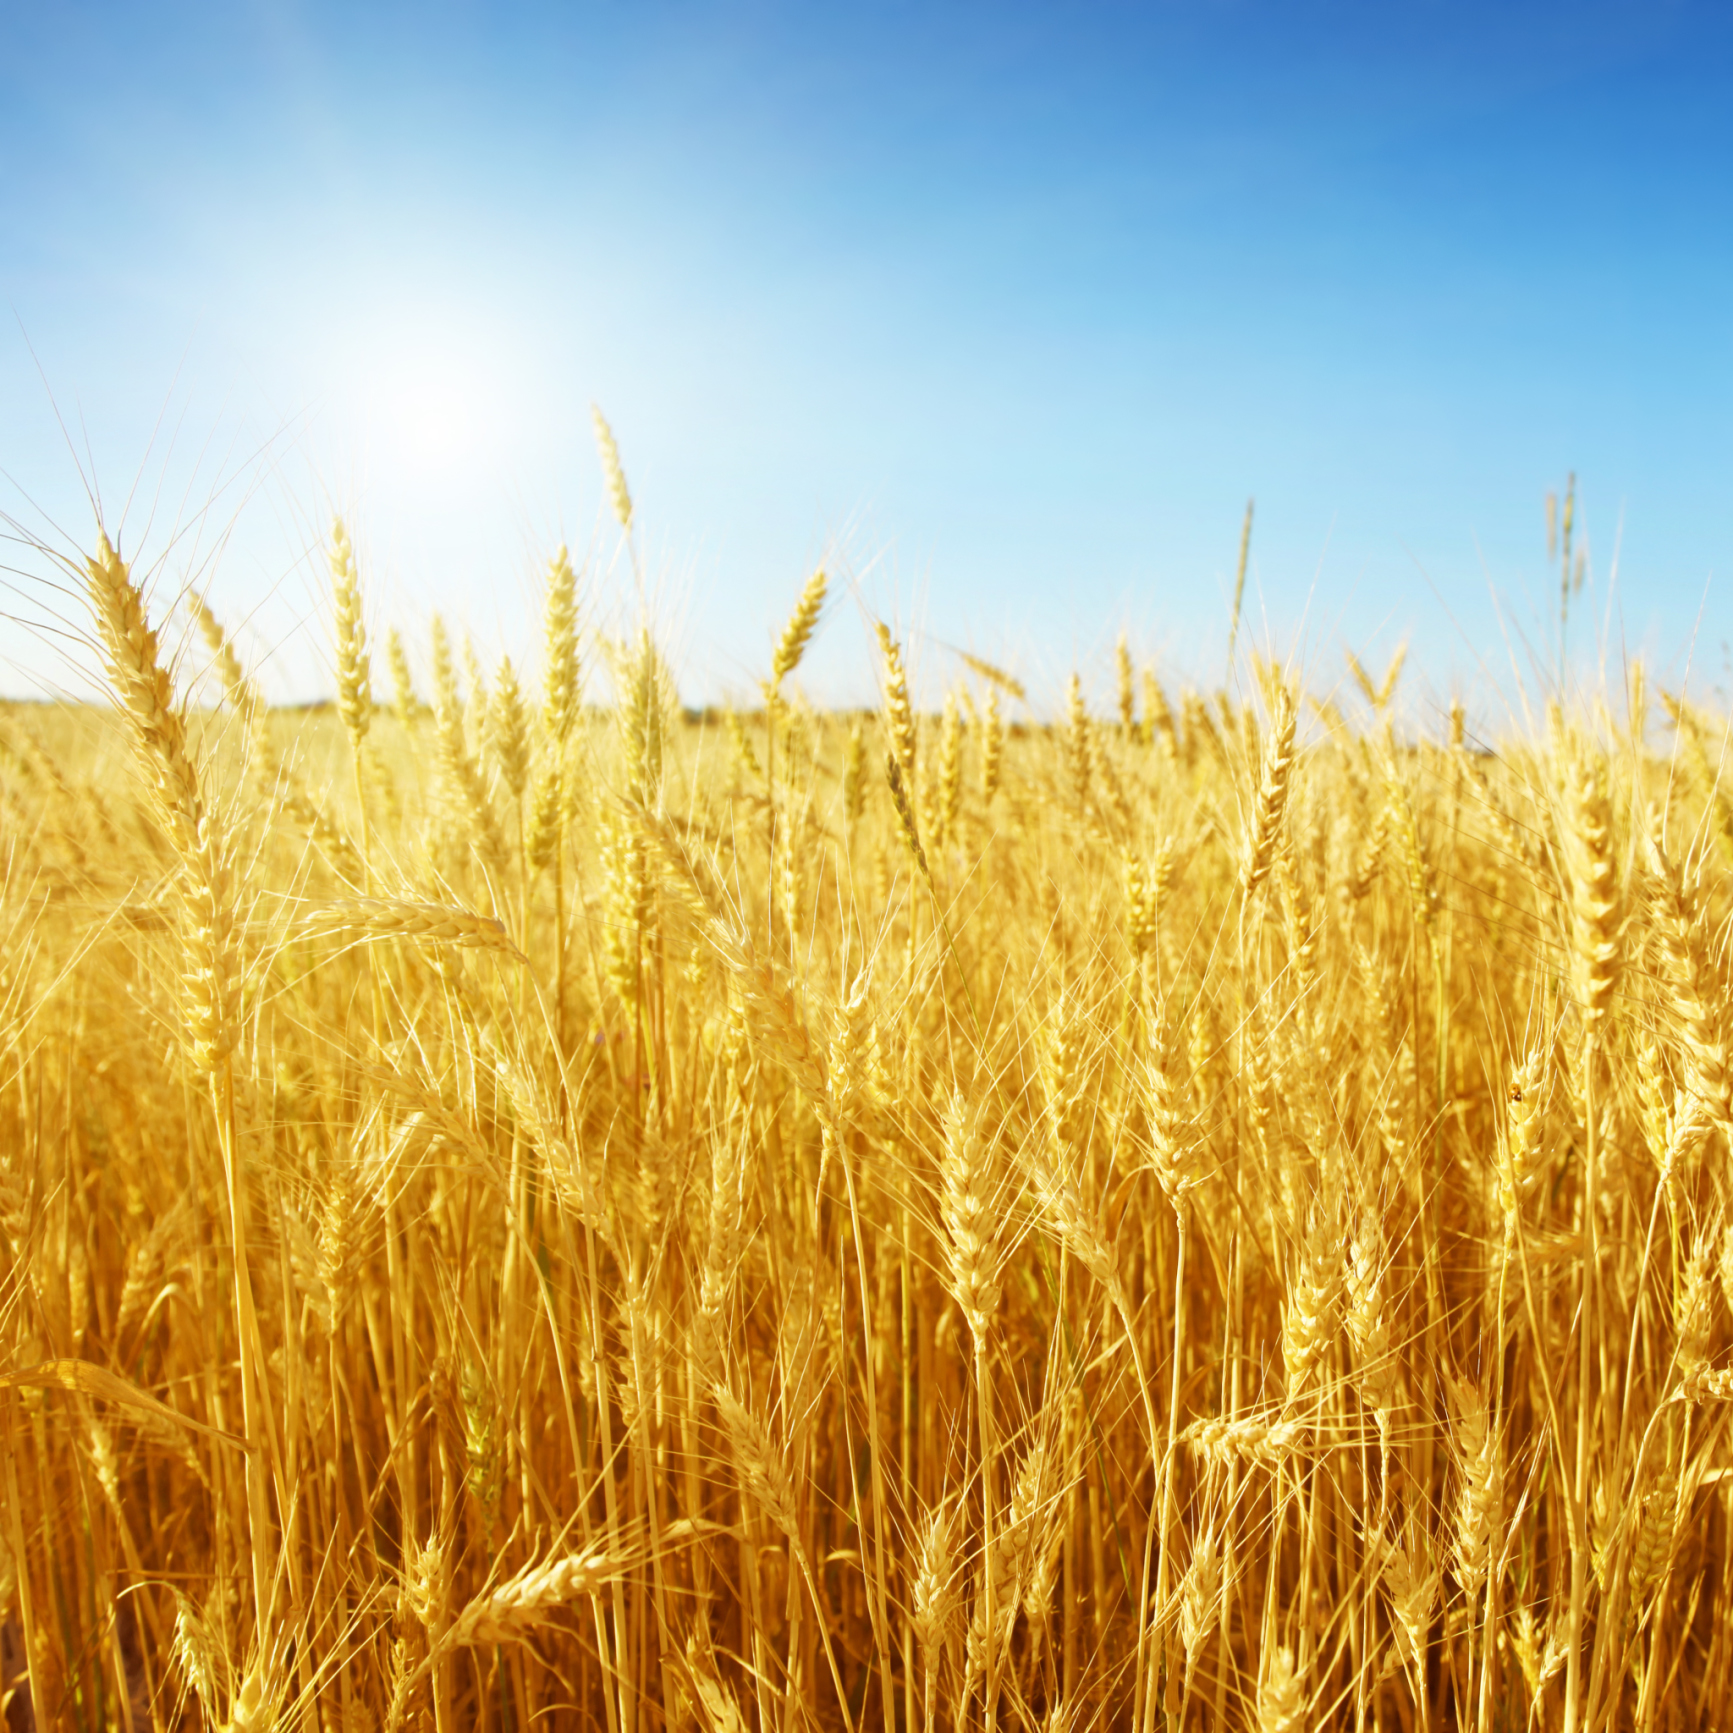 Global warming reduces wheat production